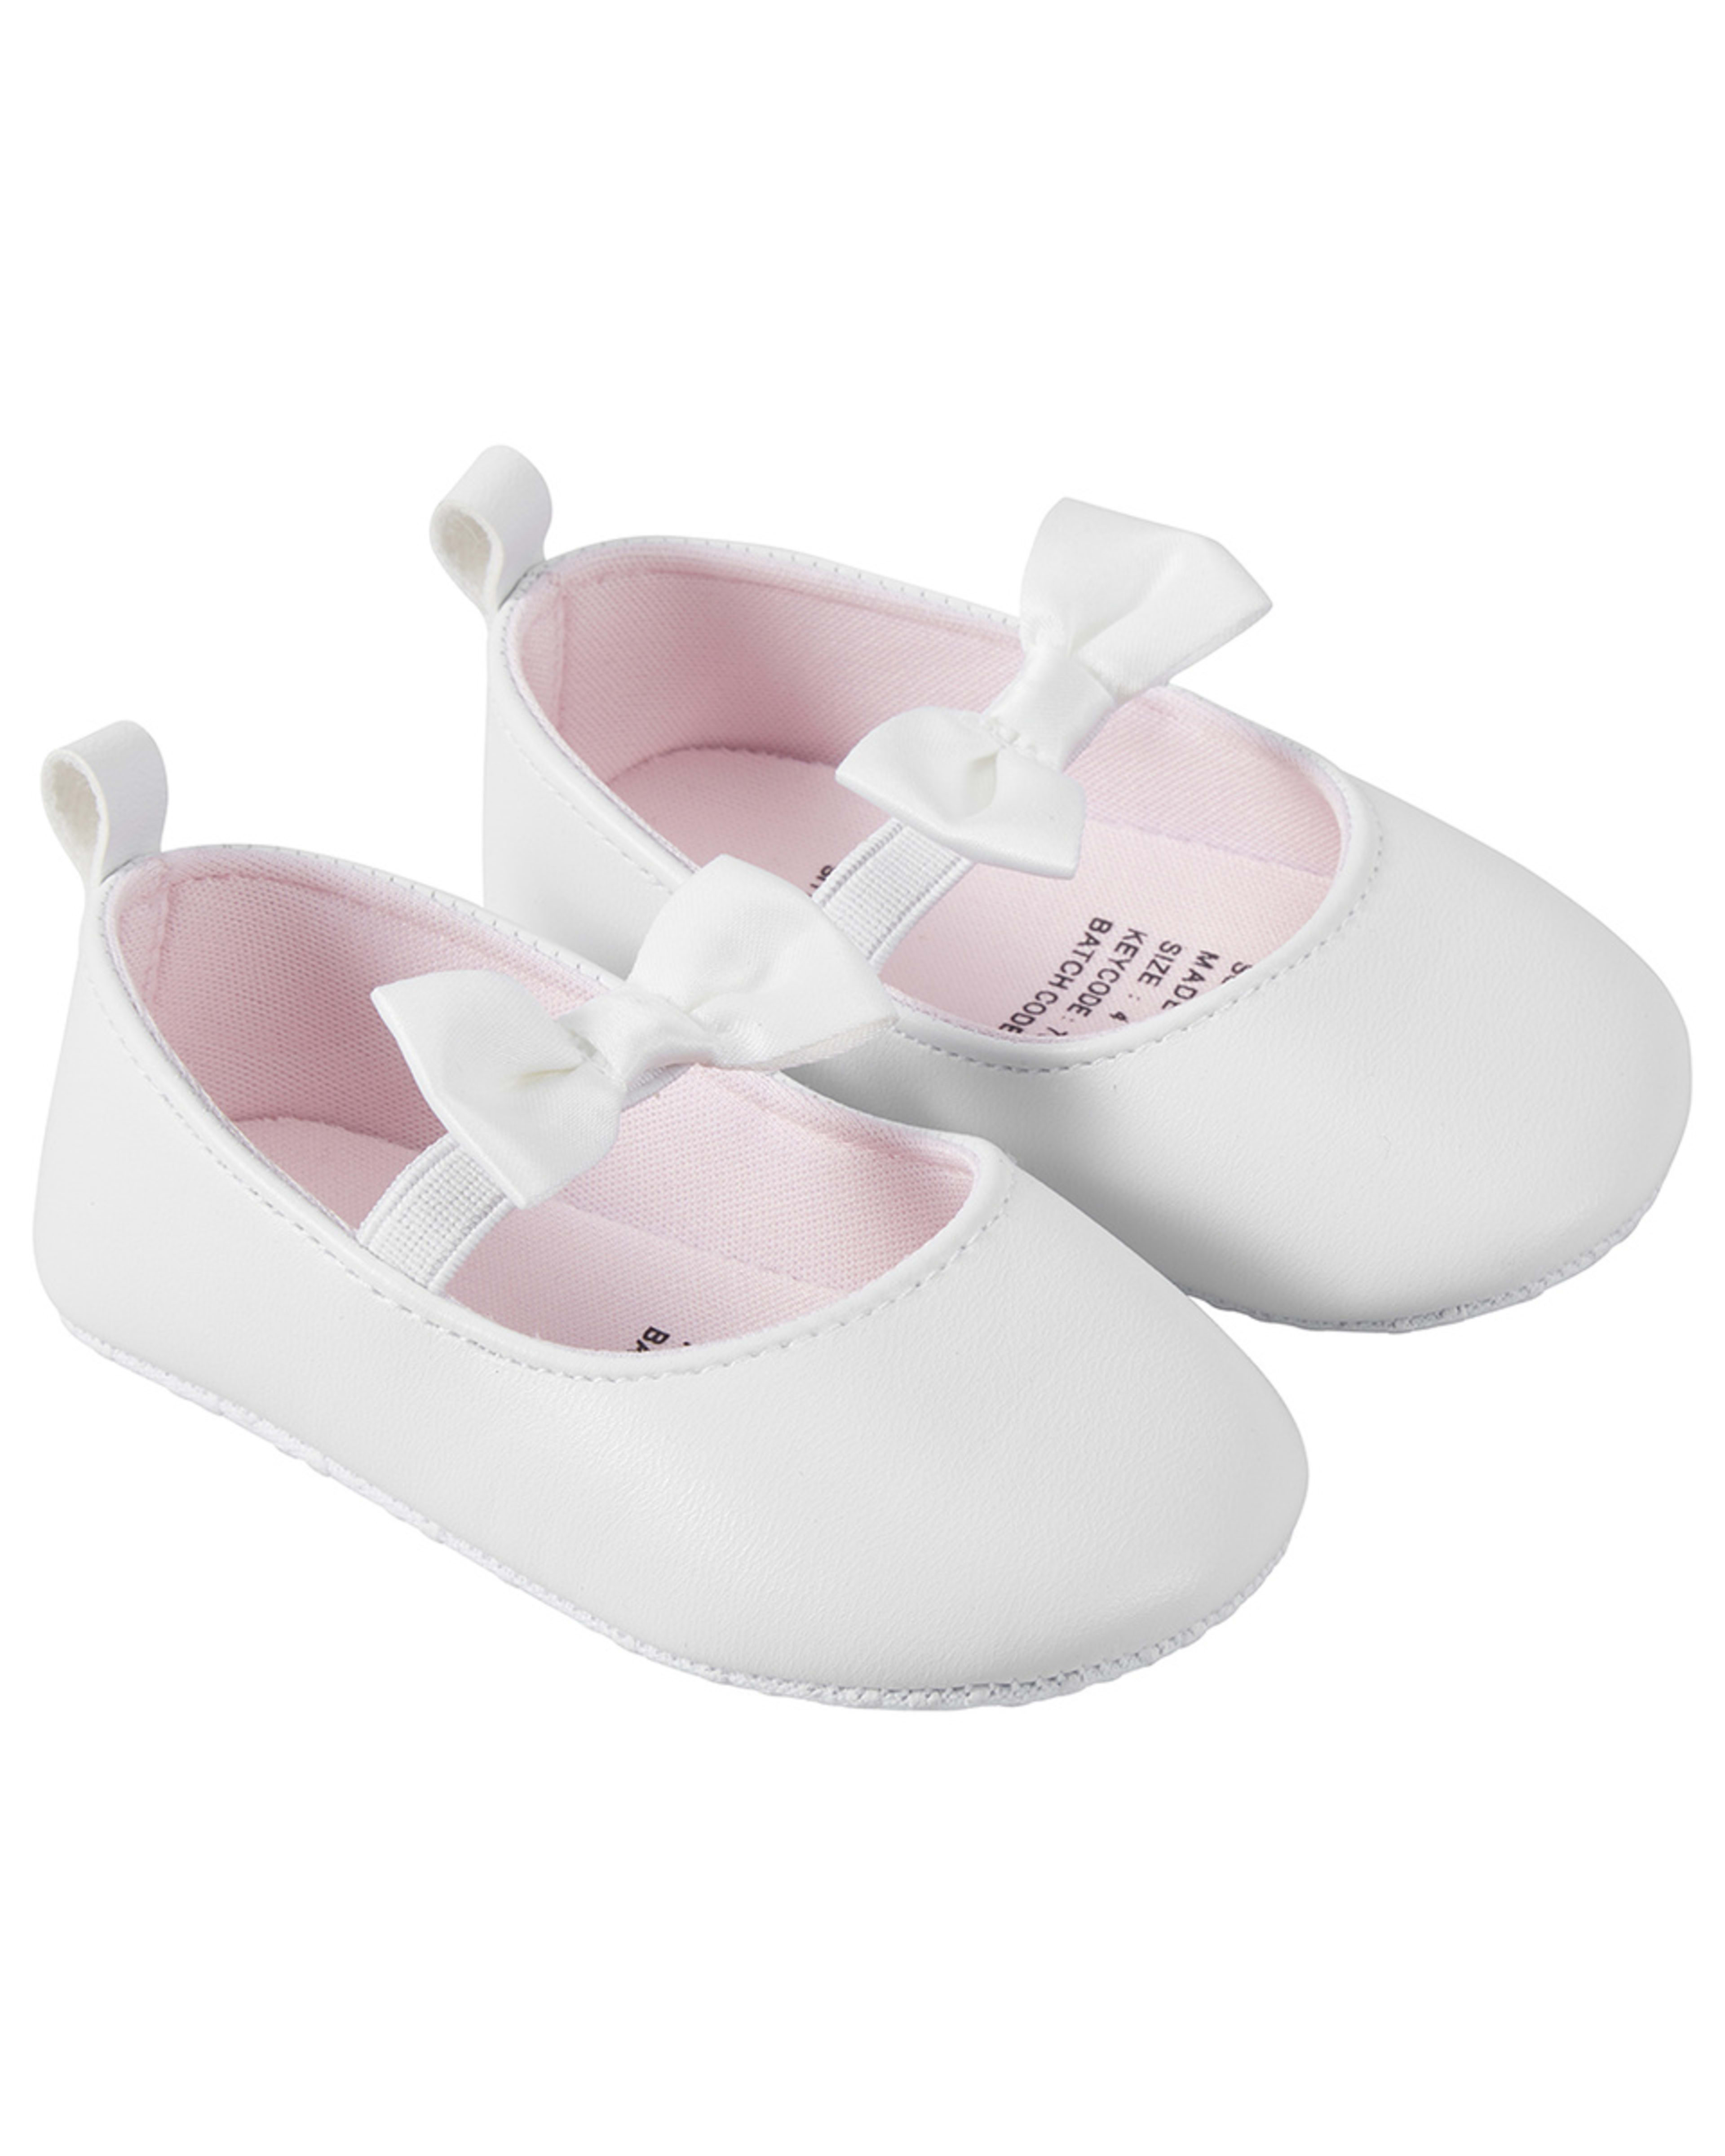 Baby A-Bar Shoes - Kmart